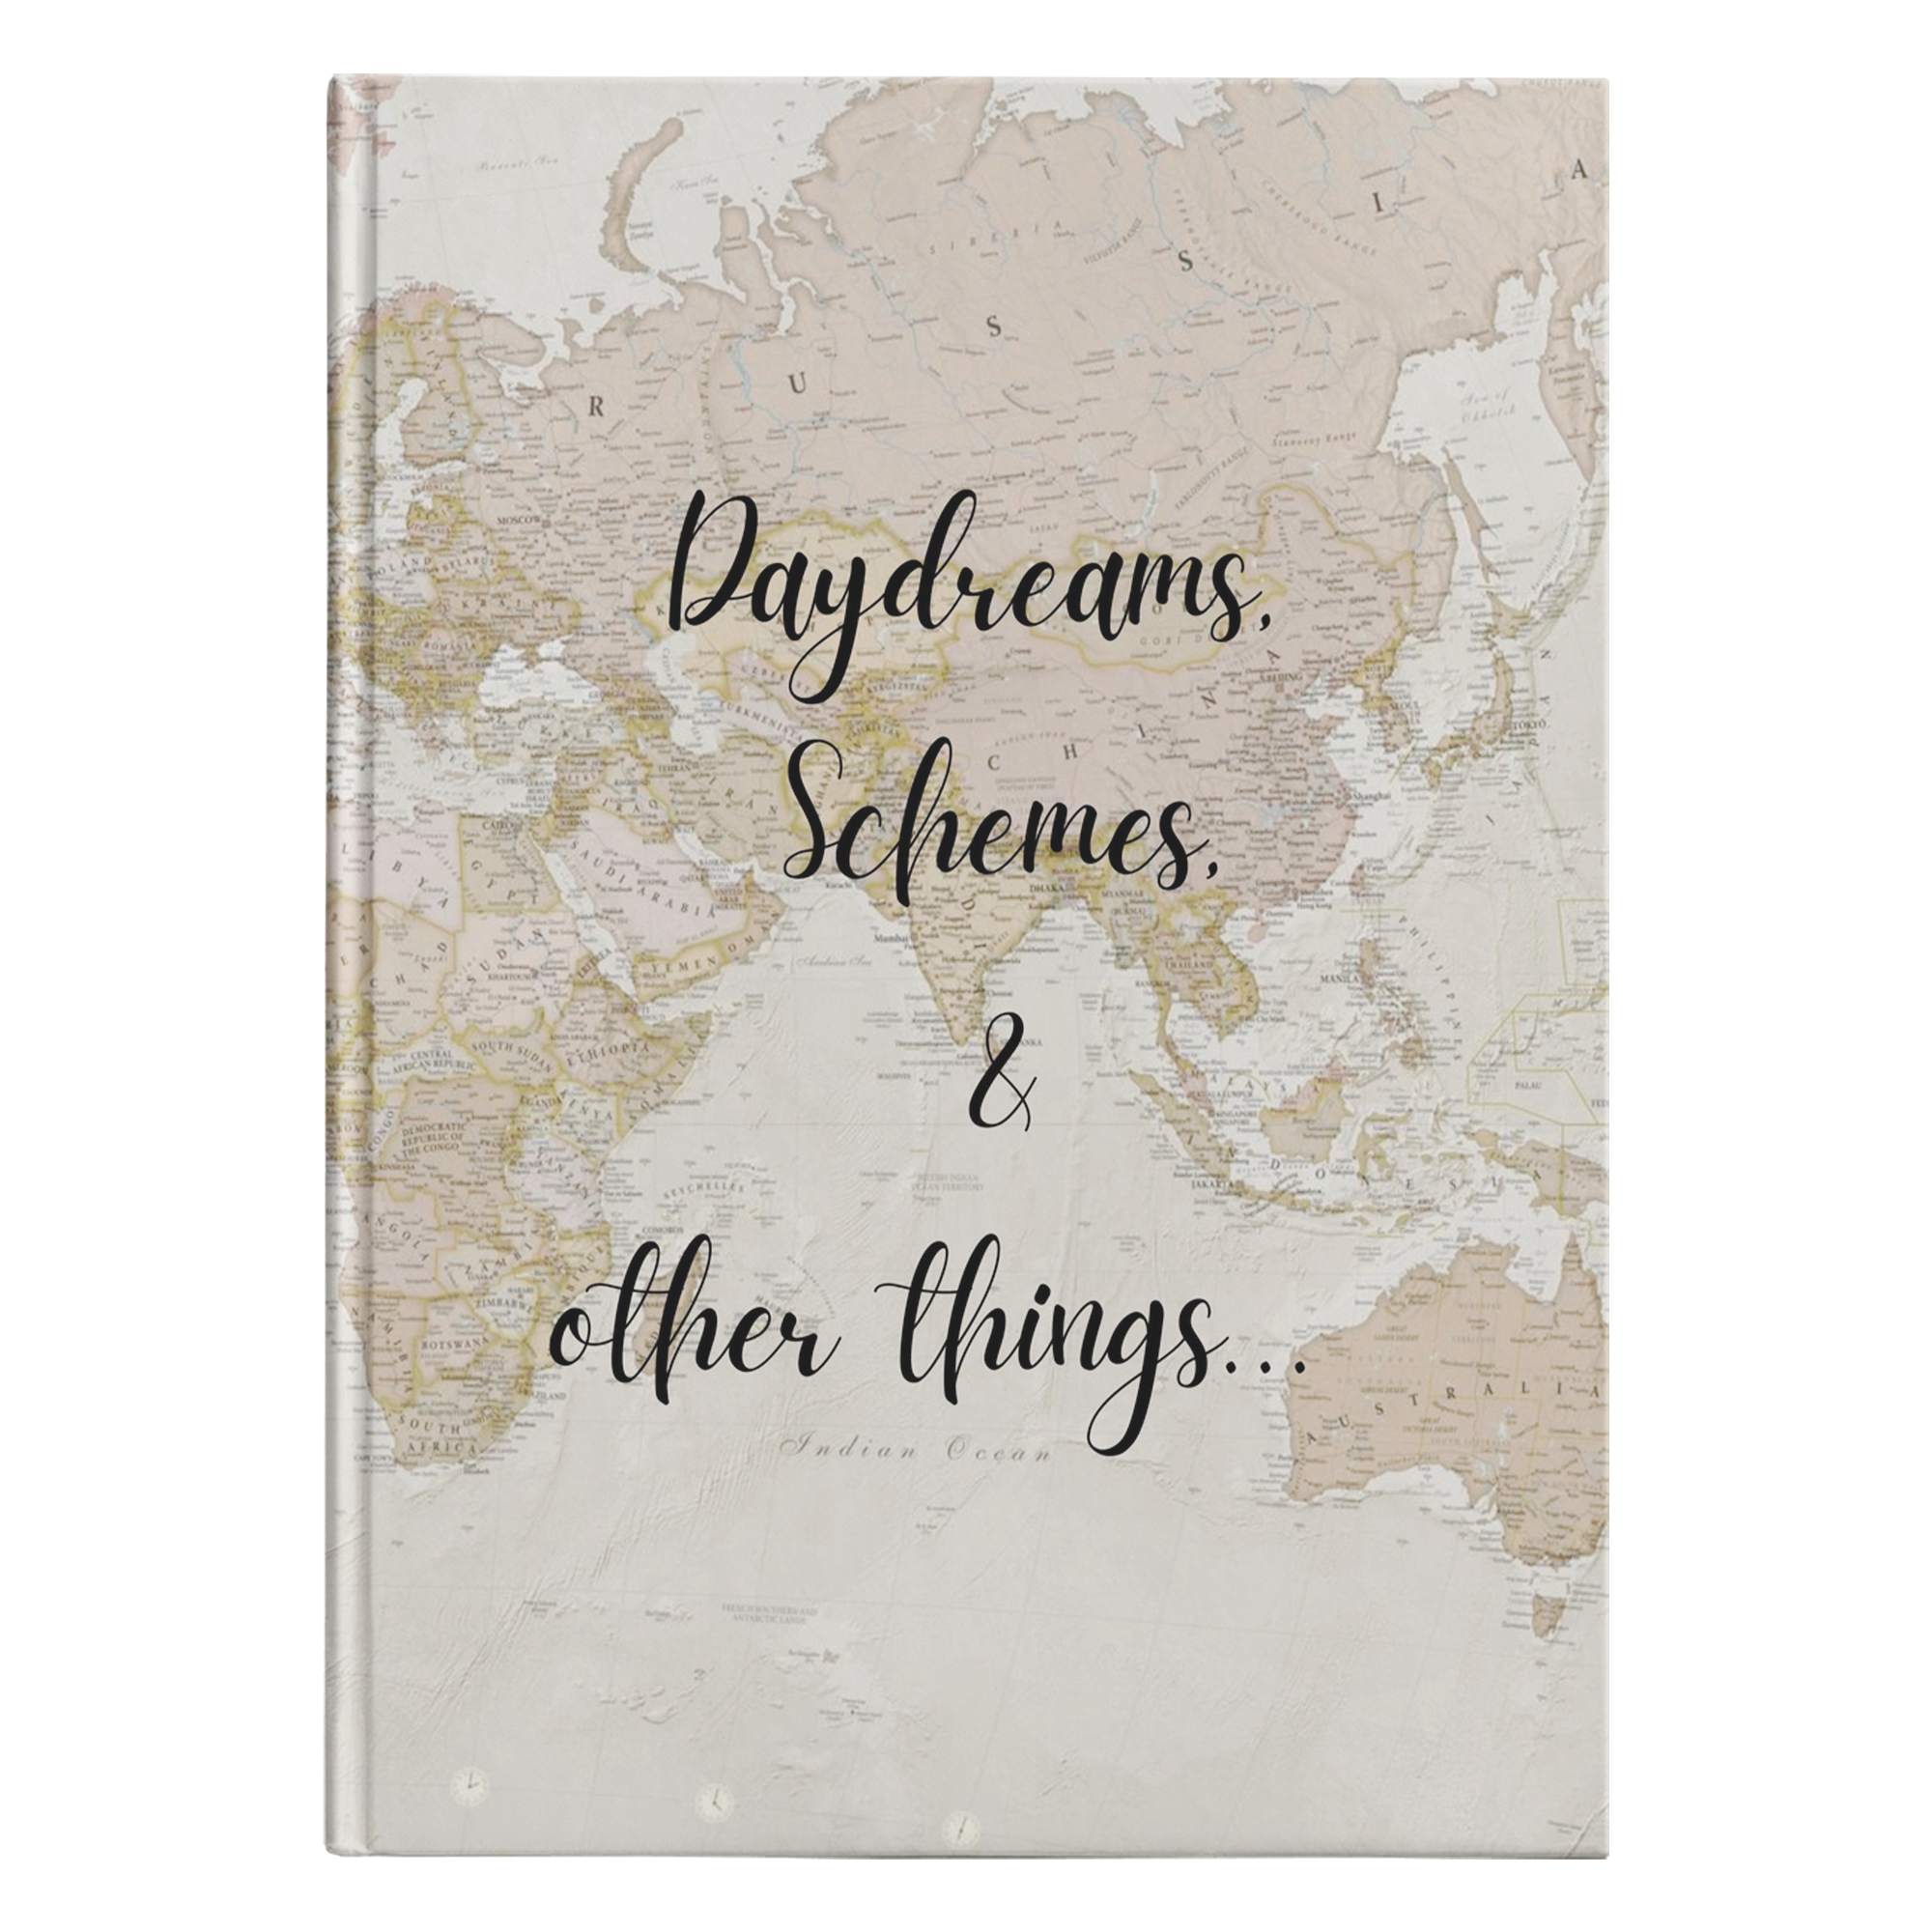 Daydreams & other things Journal